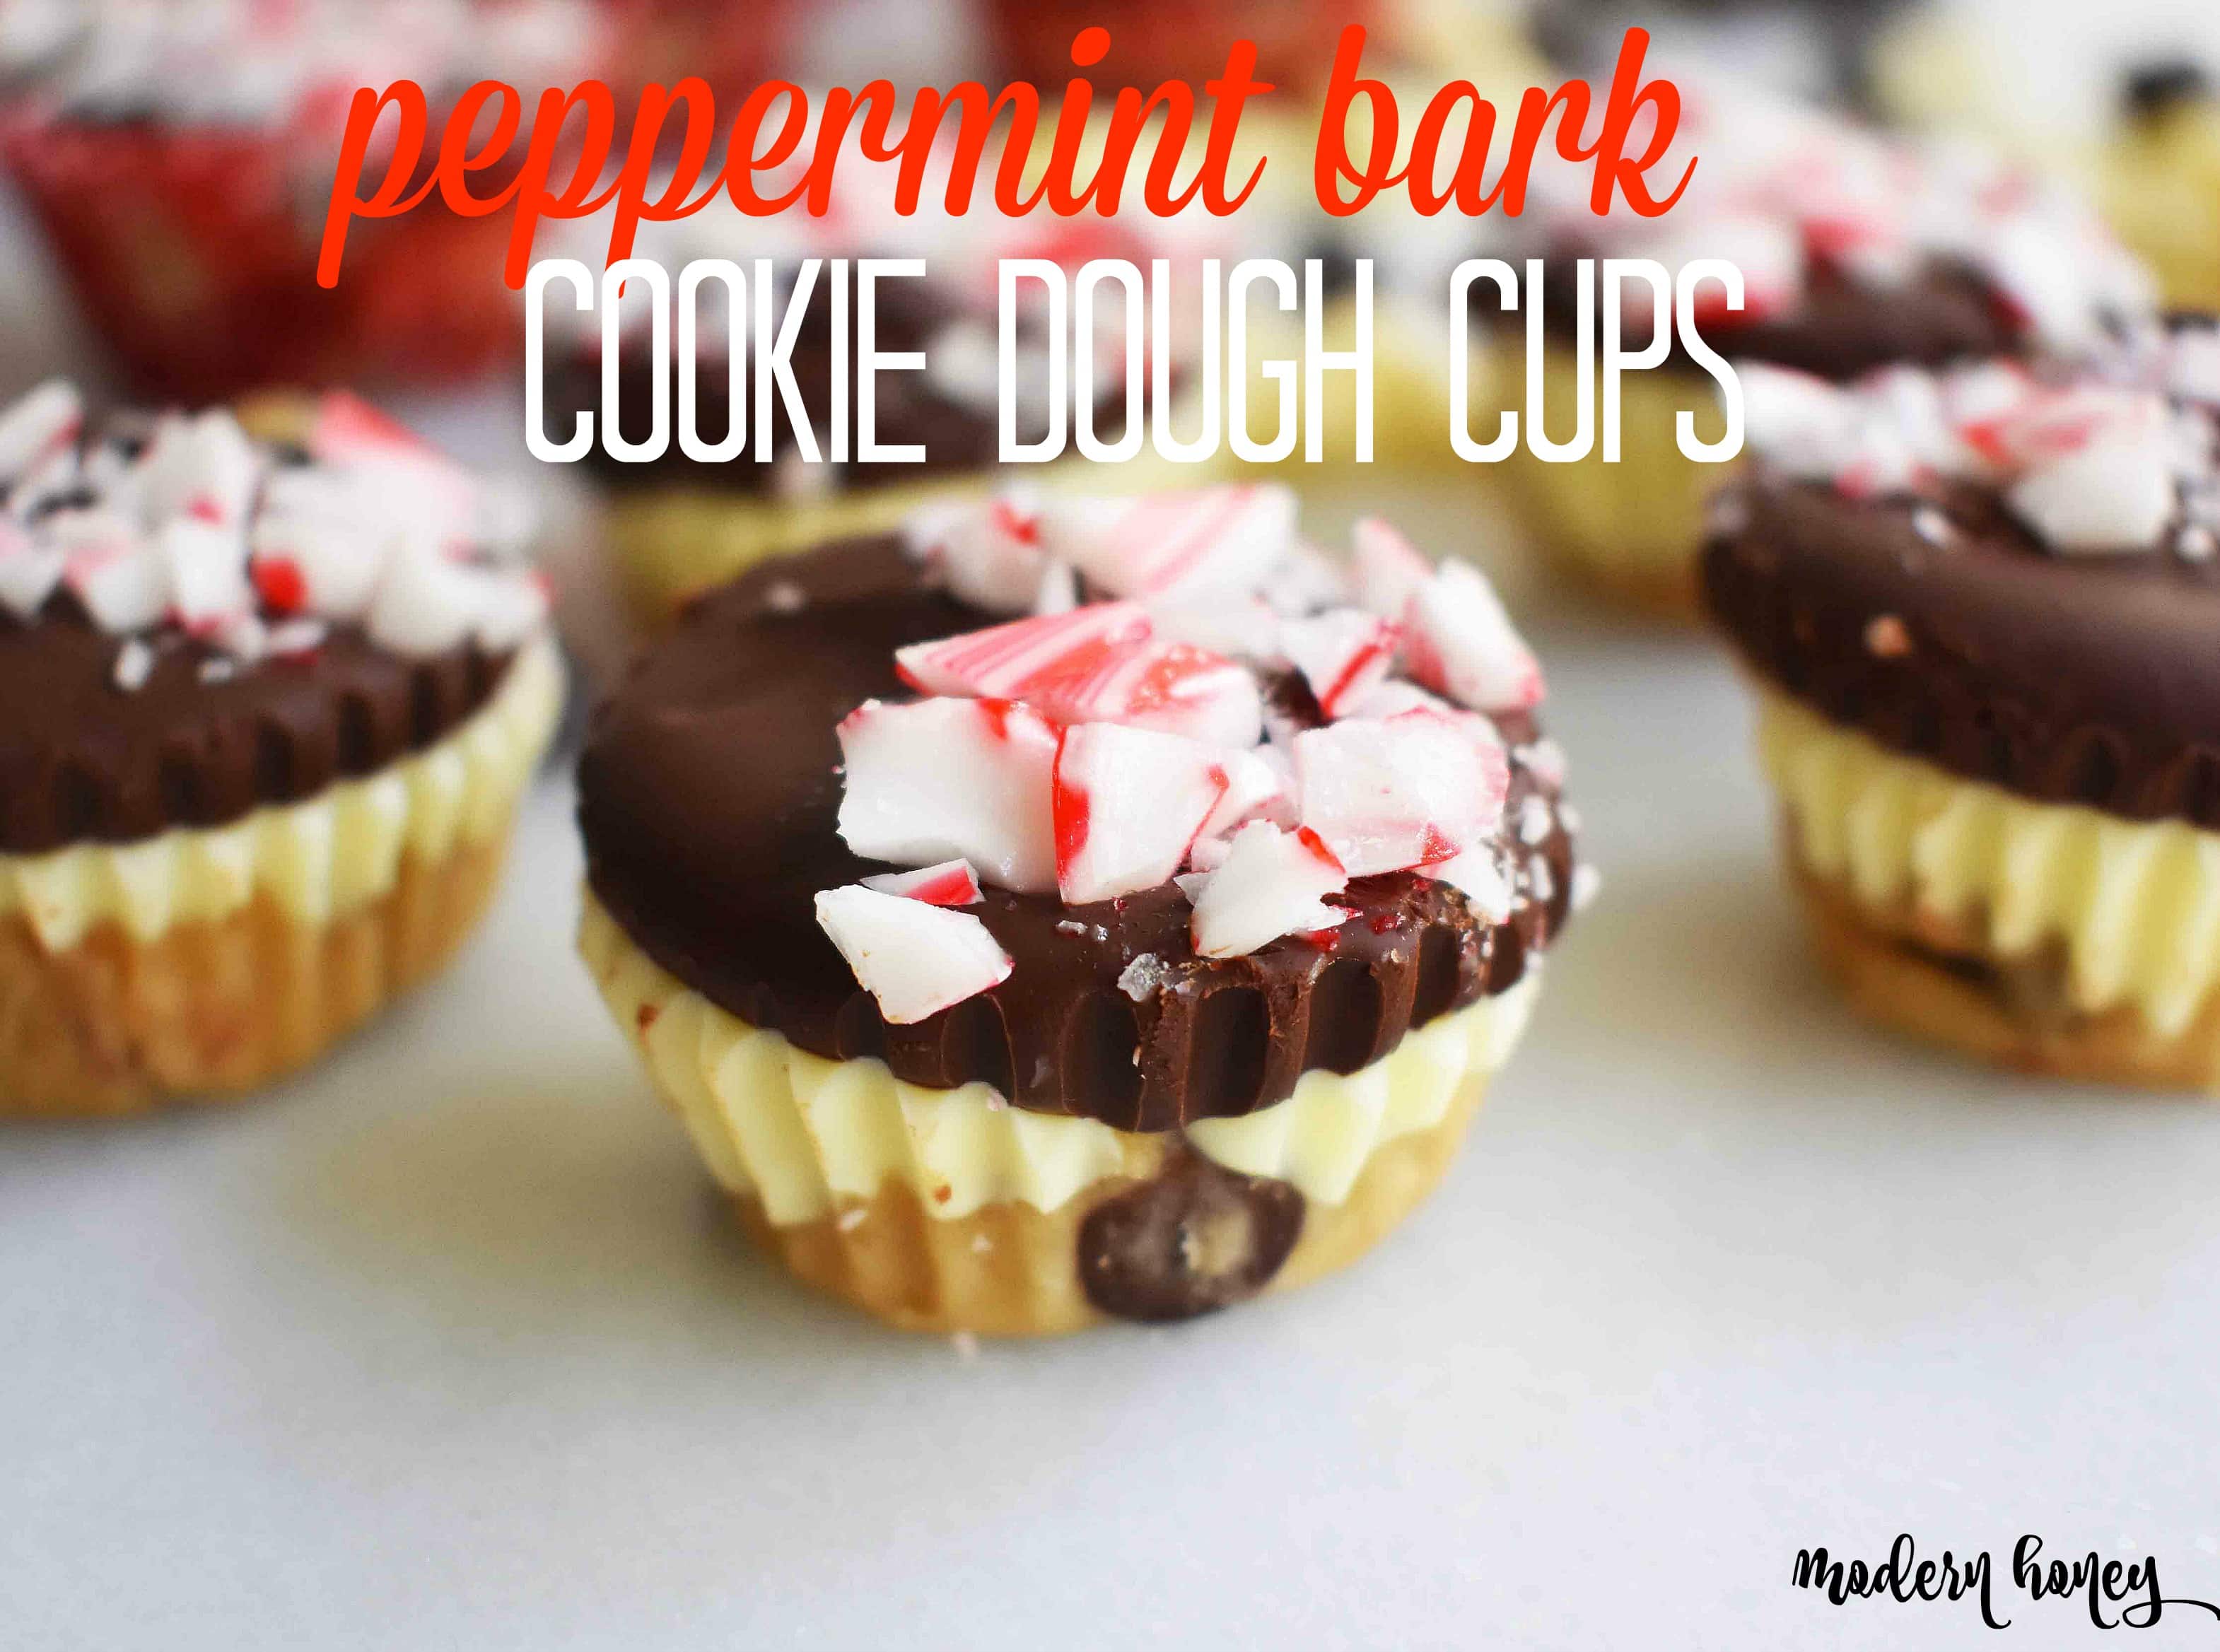 Peppermint Bark Cookie Dough Cups by Modern Honey. Egg Free Chocolate Chip Cookie Dough layered with white chocolate and semisweet chocolate and topped with crushed candy canes.